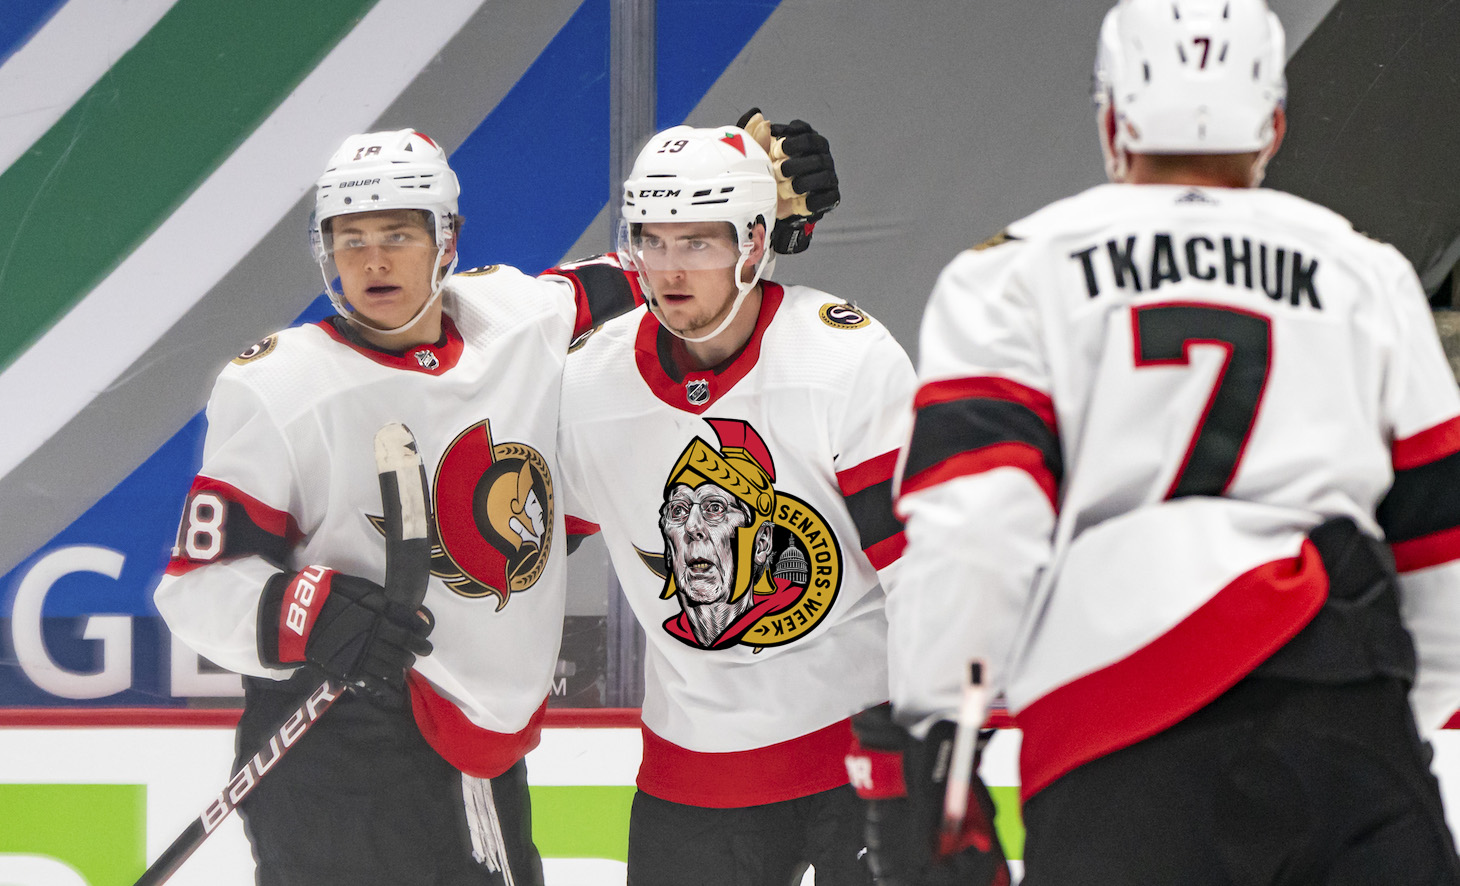 VANCOUVER, BC - APRIL 22: Drake Batherson #19 of the Ottawa Senators is congratulated by teammates Tim Stutzle #18 and Brady Tkachuk #7 after scoring a goal against the Vancouver Canucks during the first period of NHL action at Rogers Arena on April 22, 2021 in Vancouver, Canada. (Photo by Rich Lam/Getty Images)